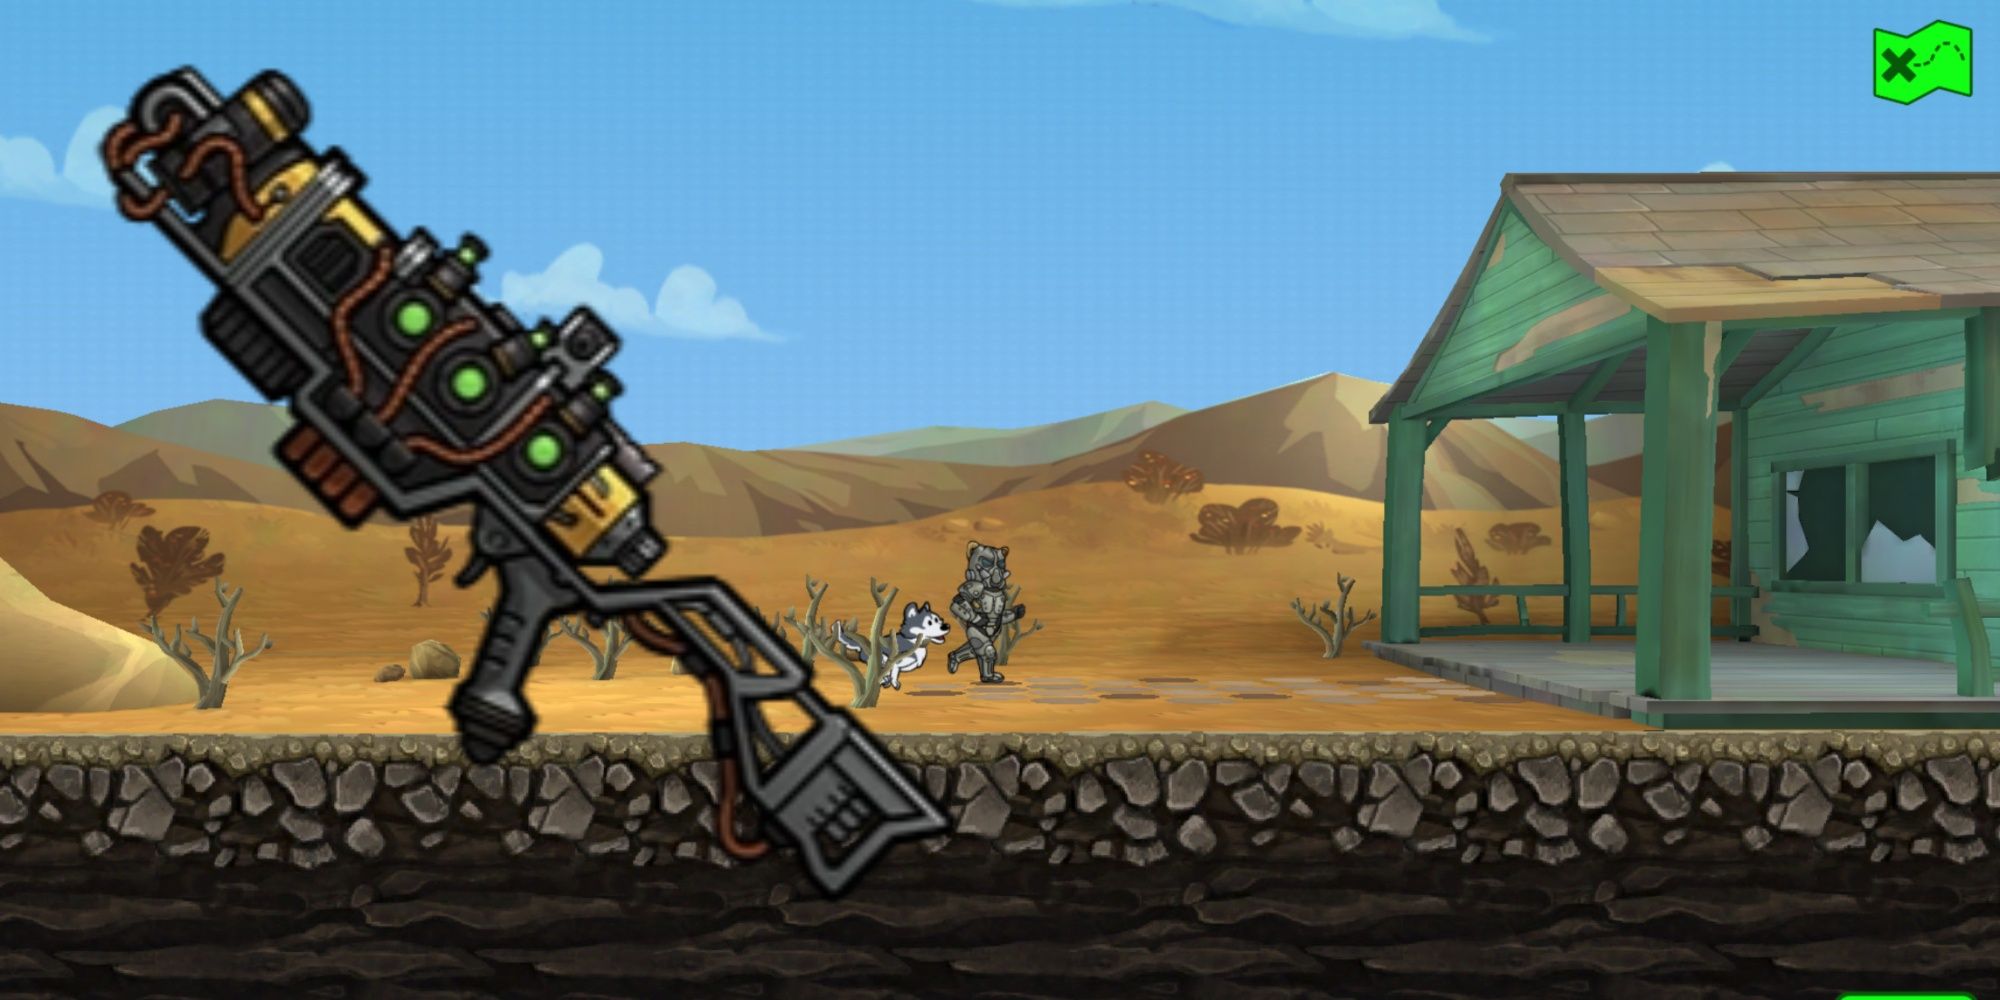 Dragons Maw Weapon In Fallout Shelter